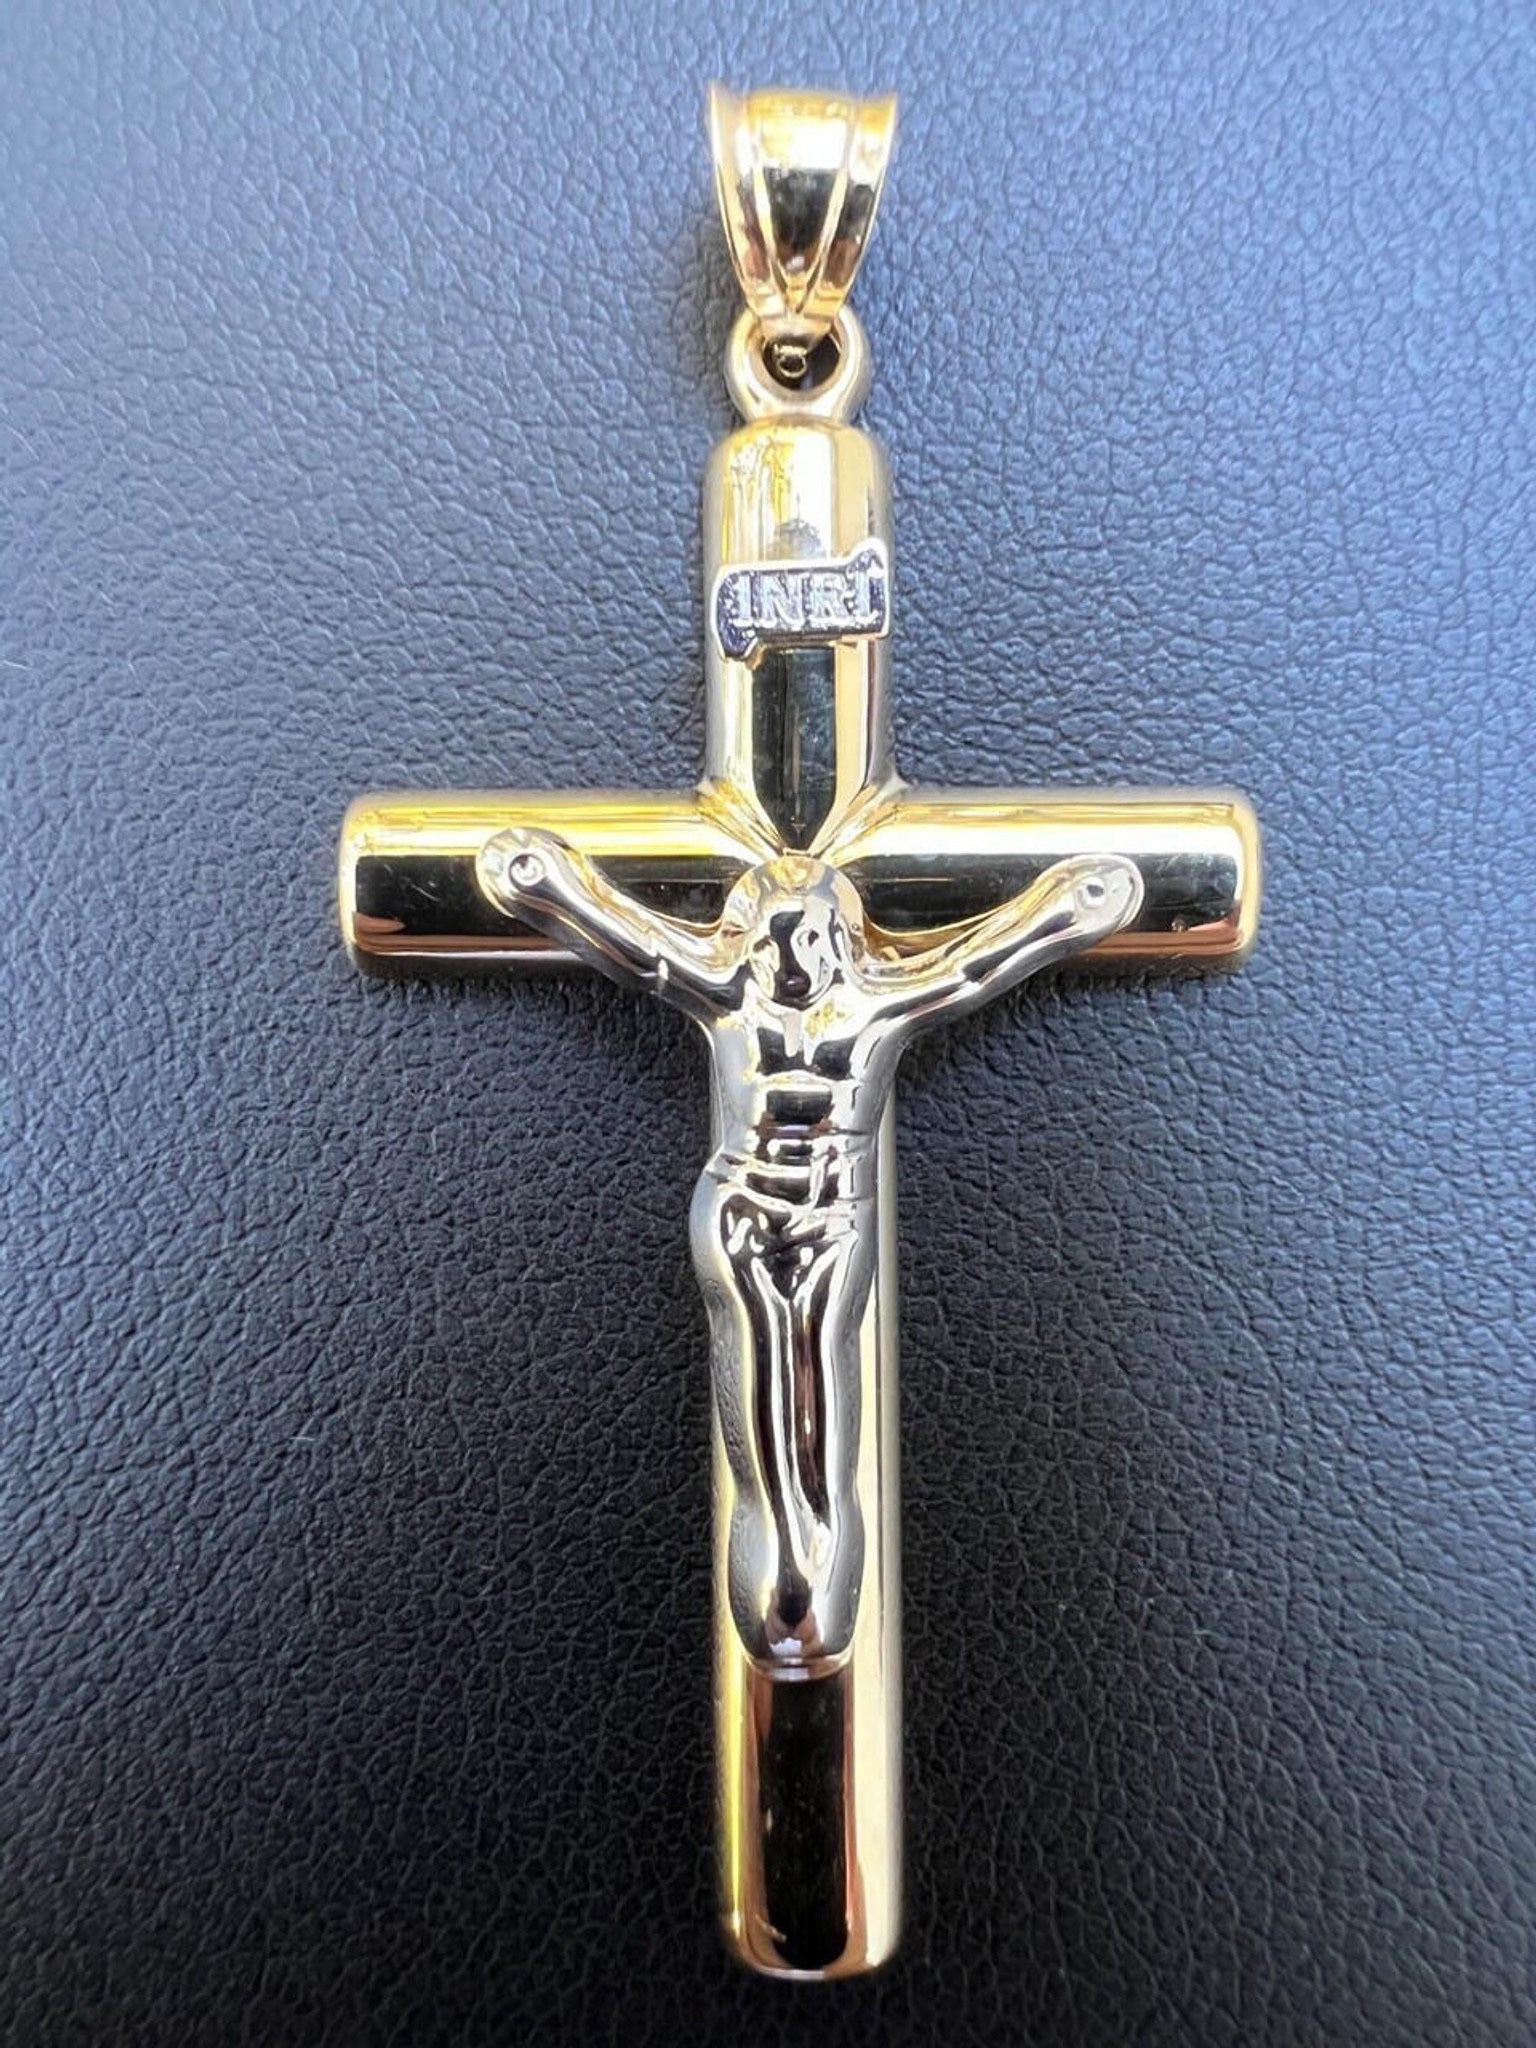 *MUST READ DESCRIPTION FIRST* Solid 14kt Yellow With White Gold Large Crucifix Pendant 